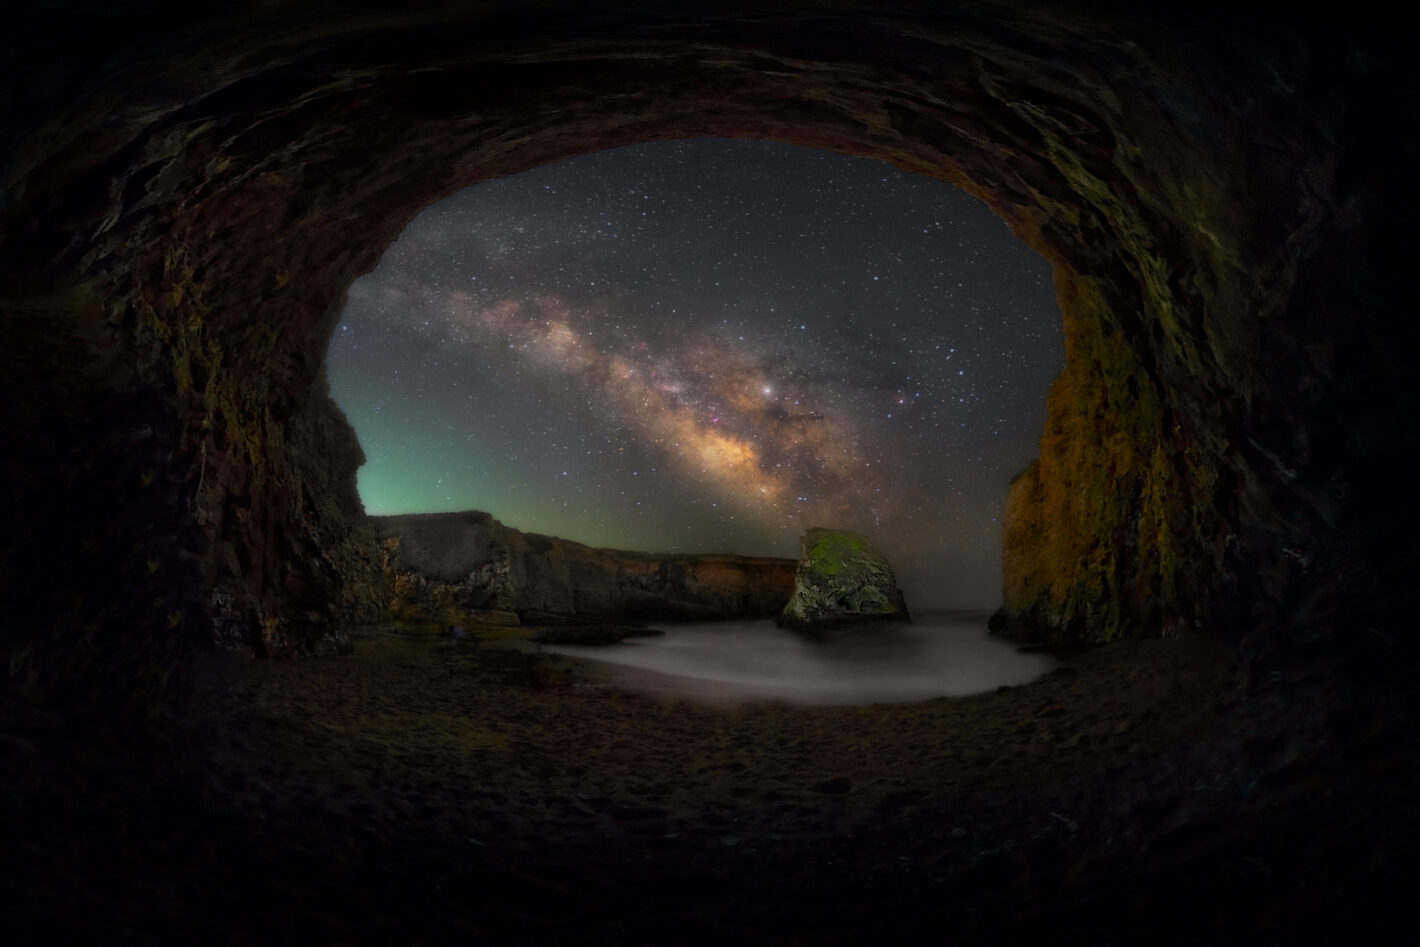 1er Prix Junior - Prix des Adhérents - Troglo Night, Shark Fin Cove in Davenport, California. Sony a7RIV, 16 mm, 10s, 10000 ISO, f2.8 - 9 panels of 10 shots each for stacking, 95 exposures total